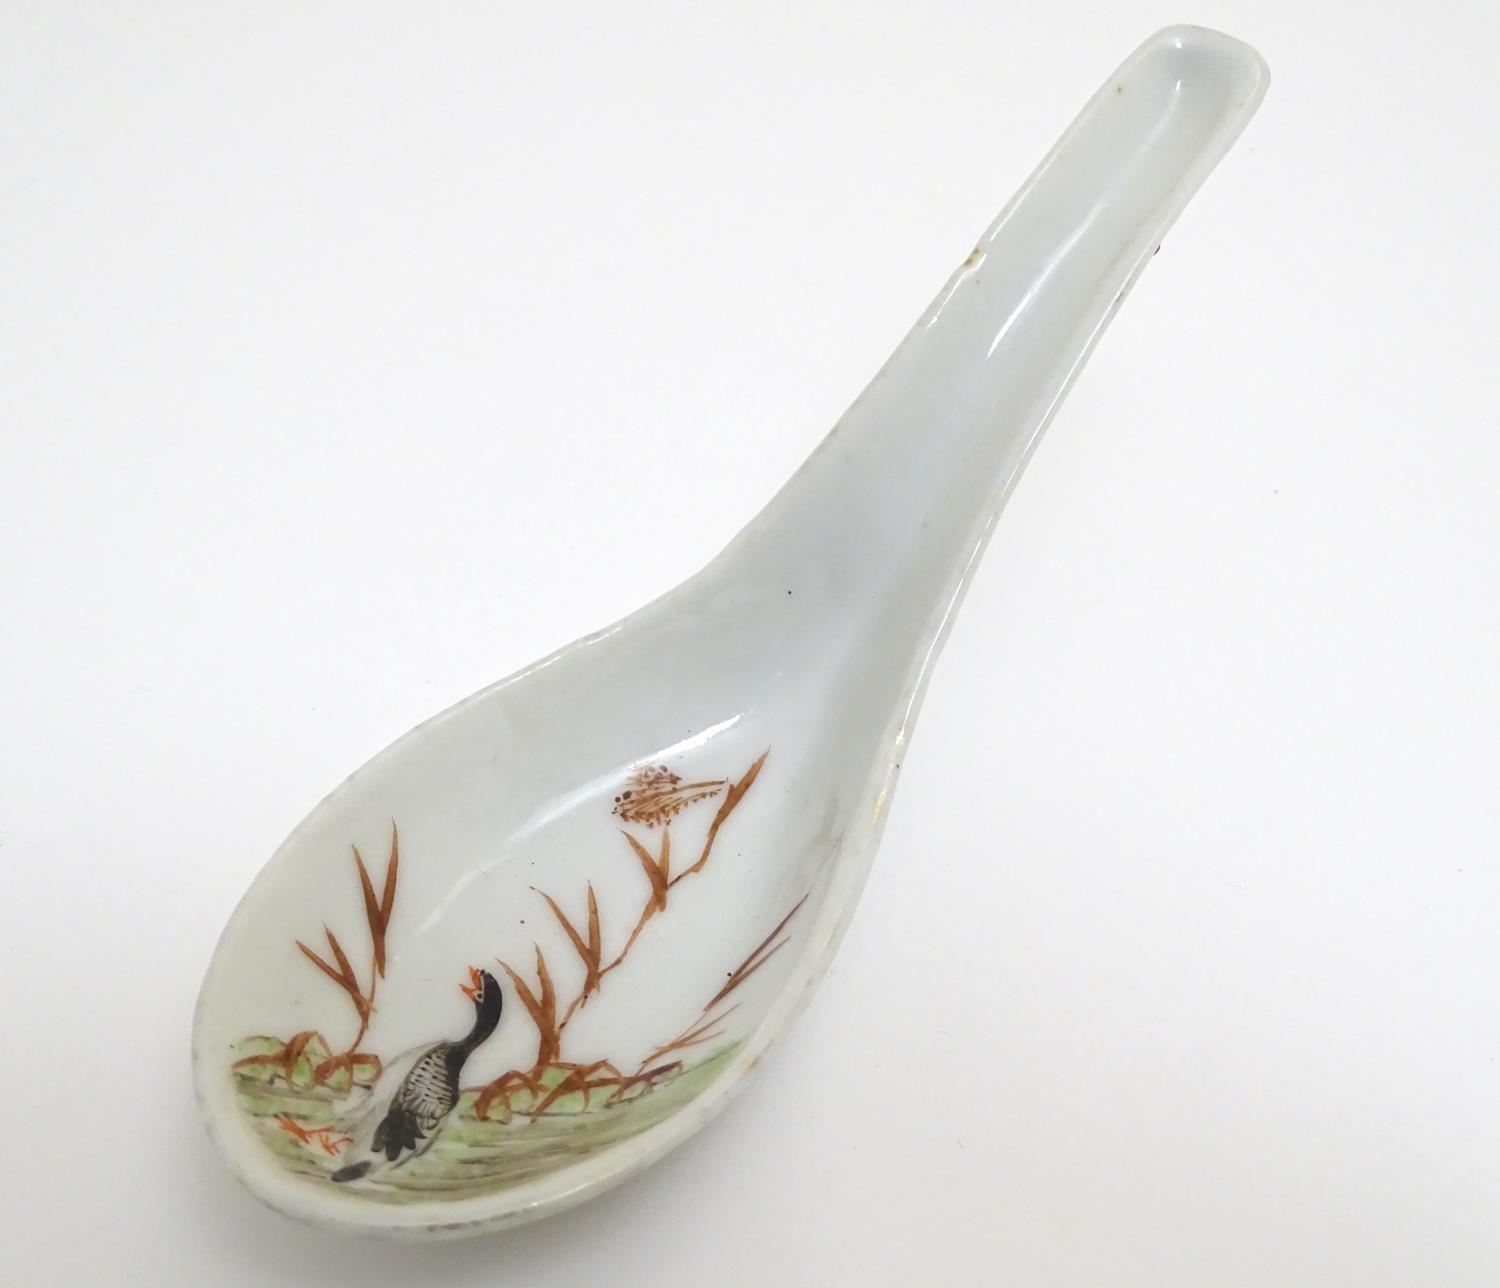 A Chinese rice / soup spoon with hand painted decoration depicting a goose / bird in a wetland